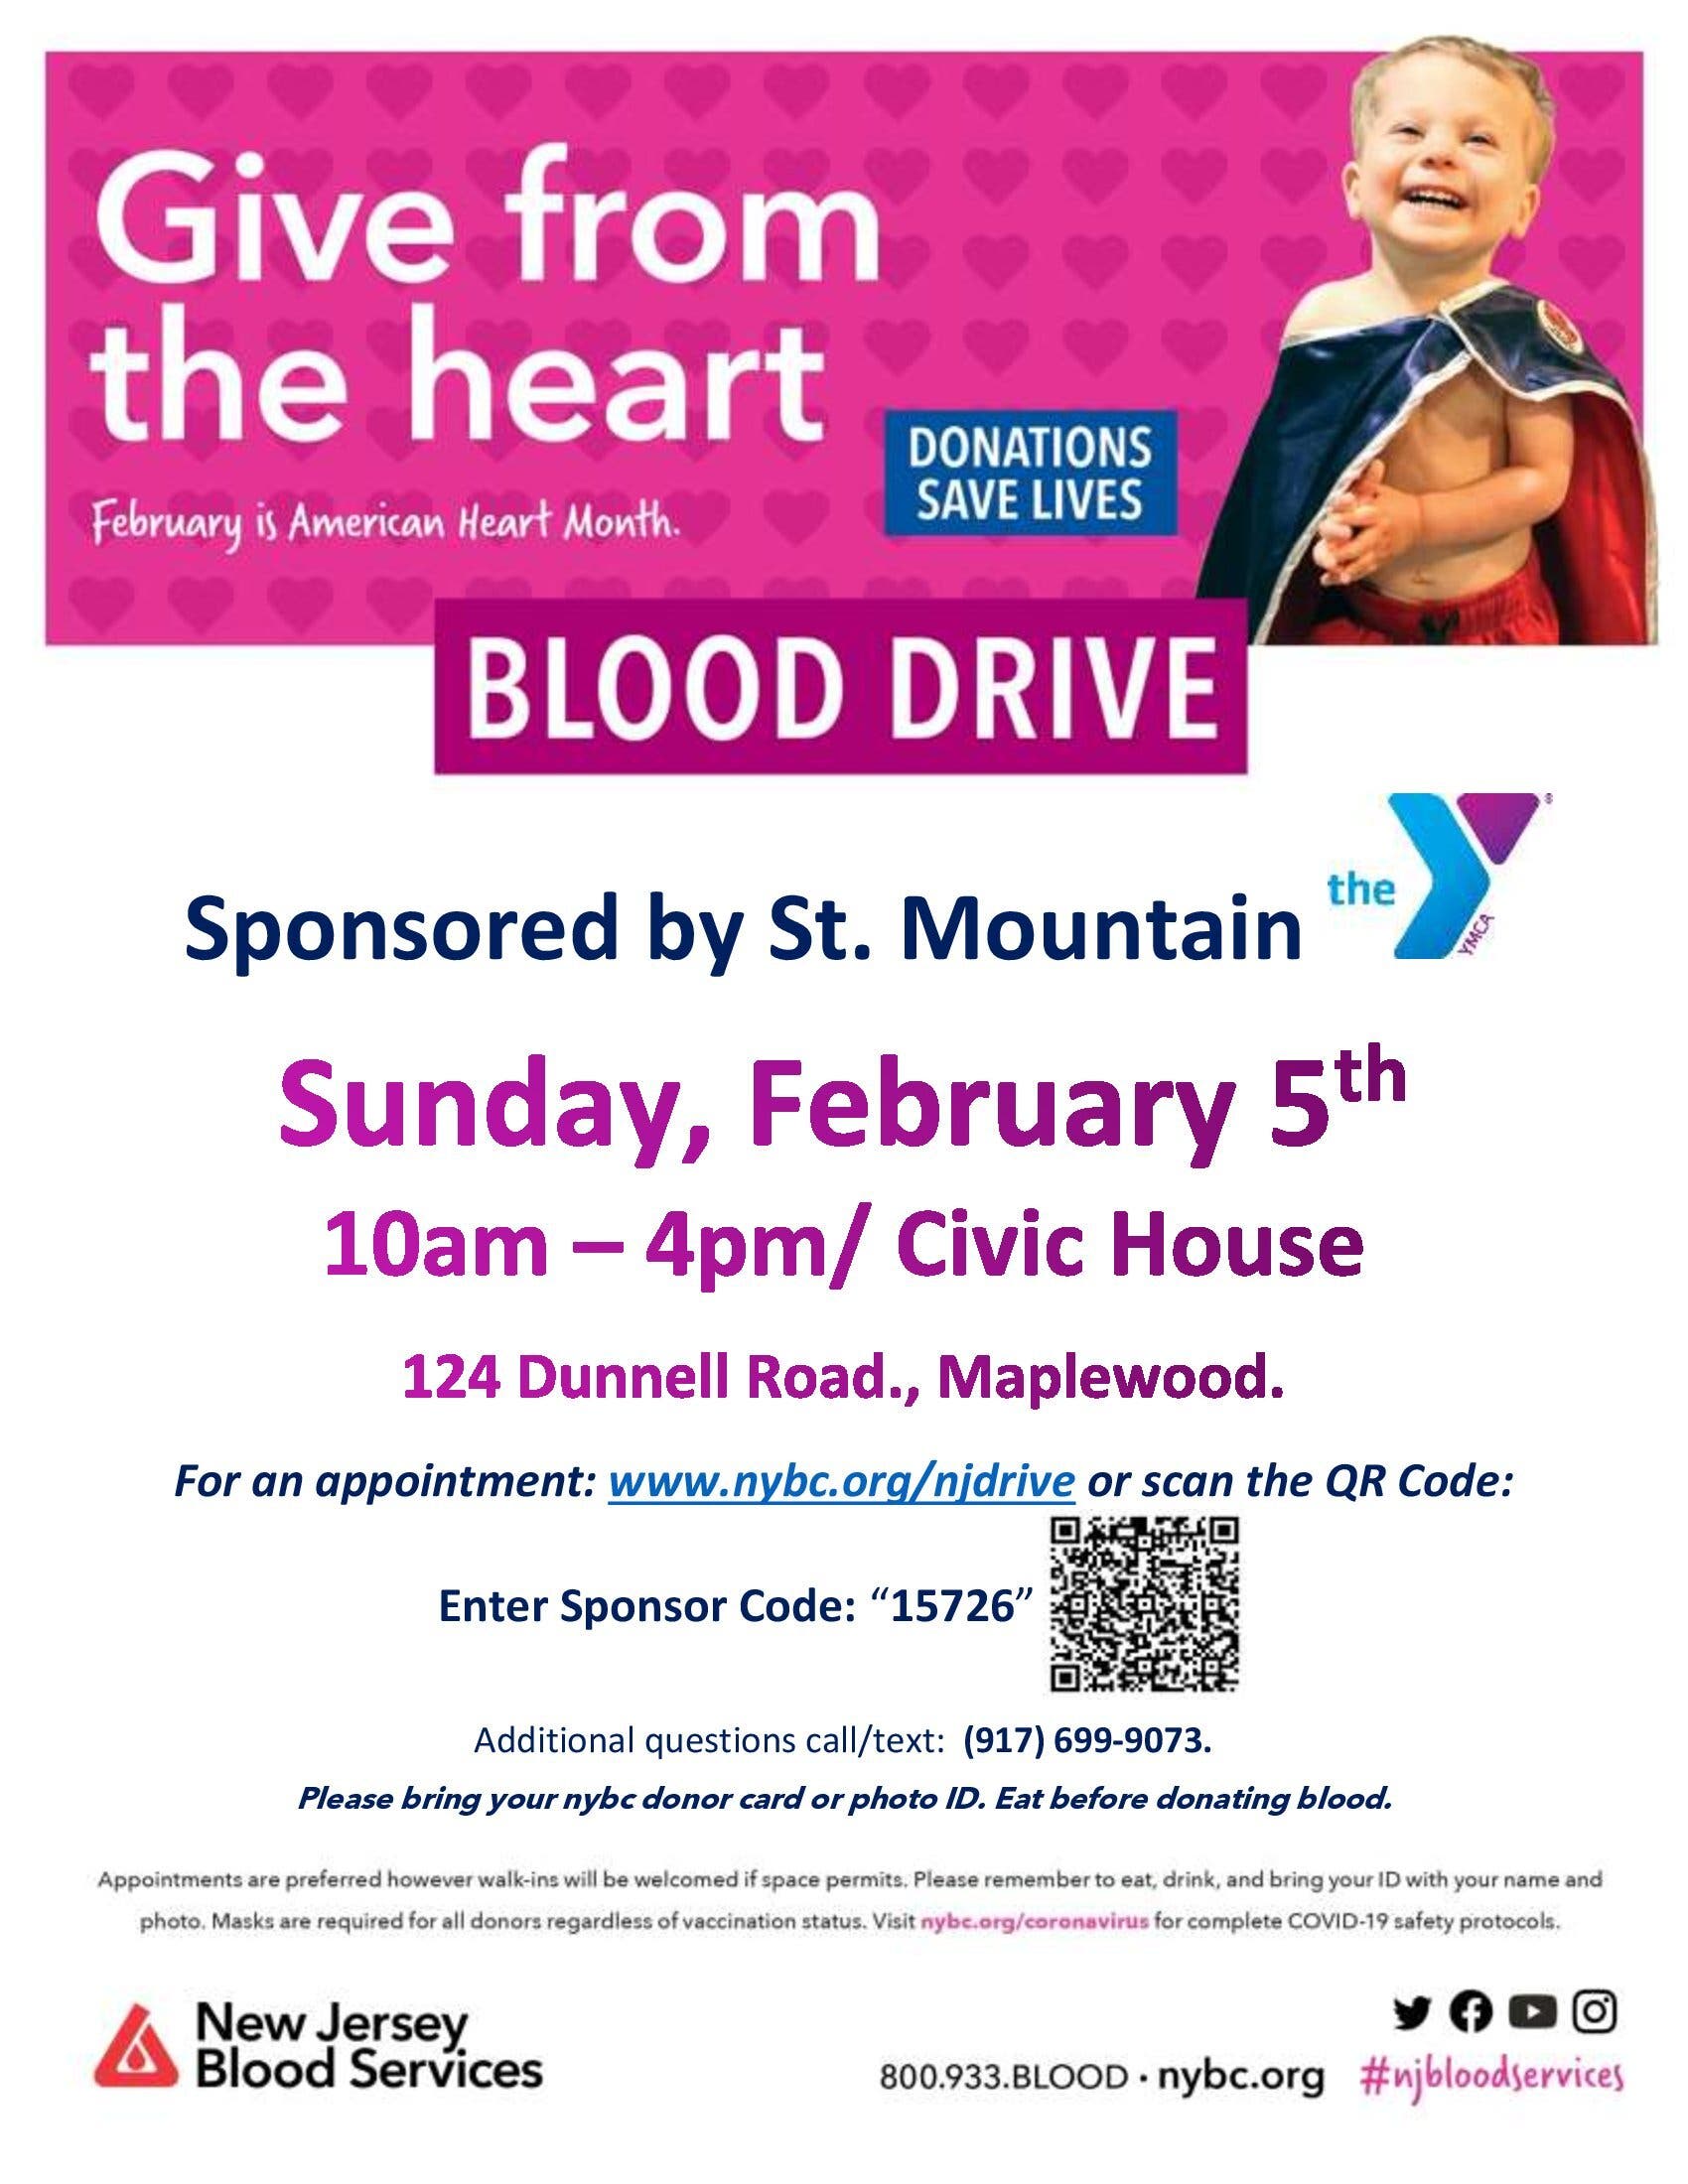 Maplewood American Heart Month Blood Drive